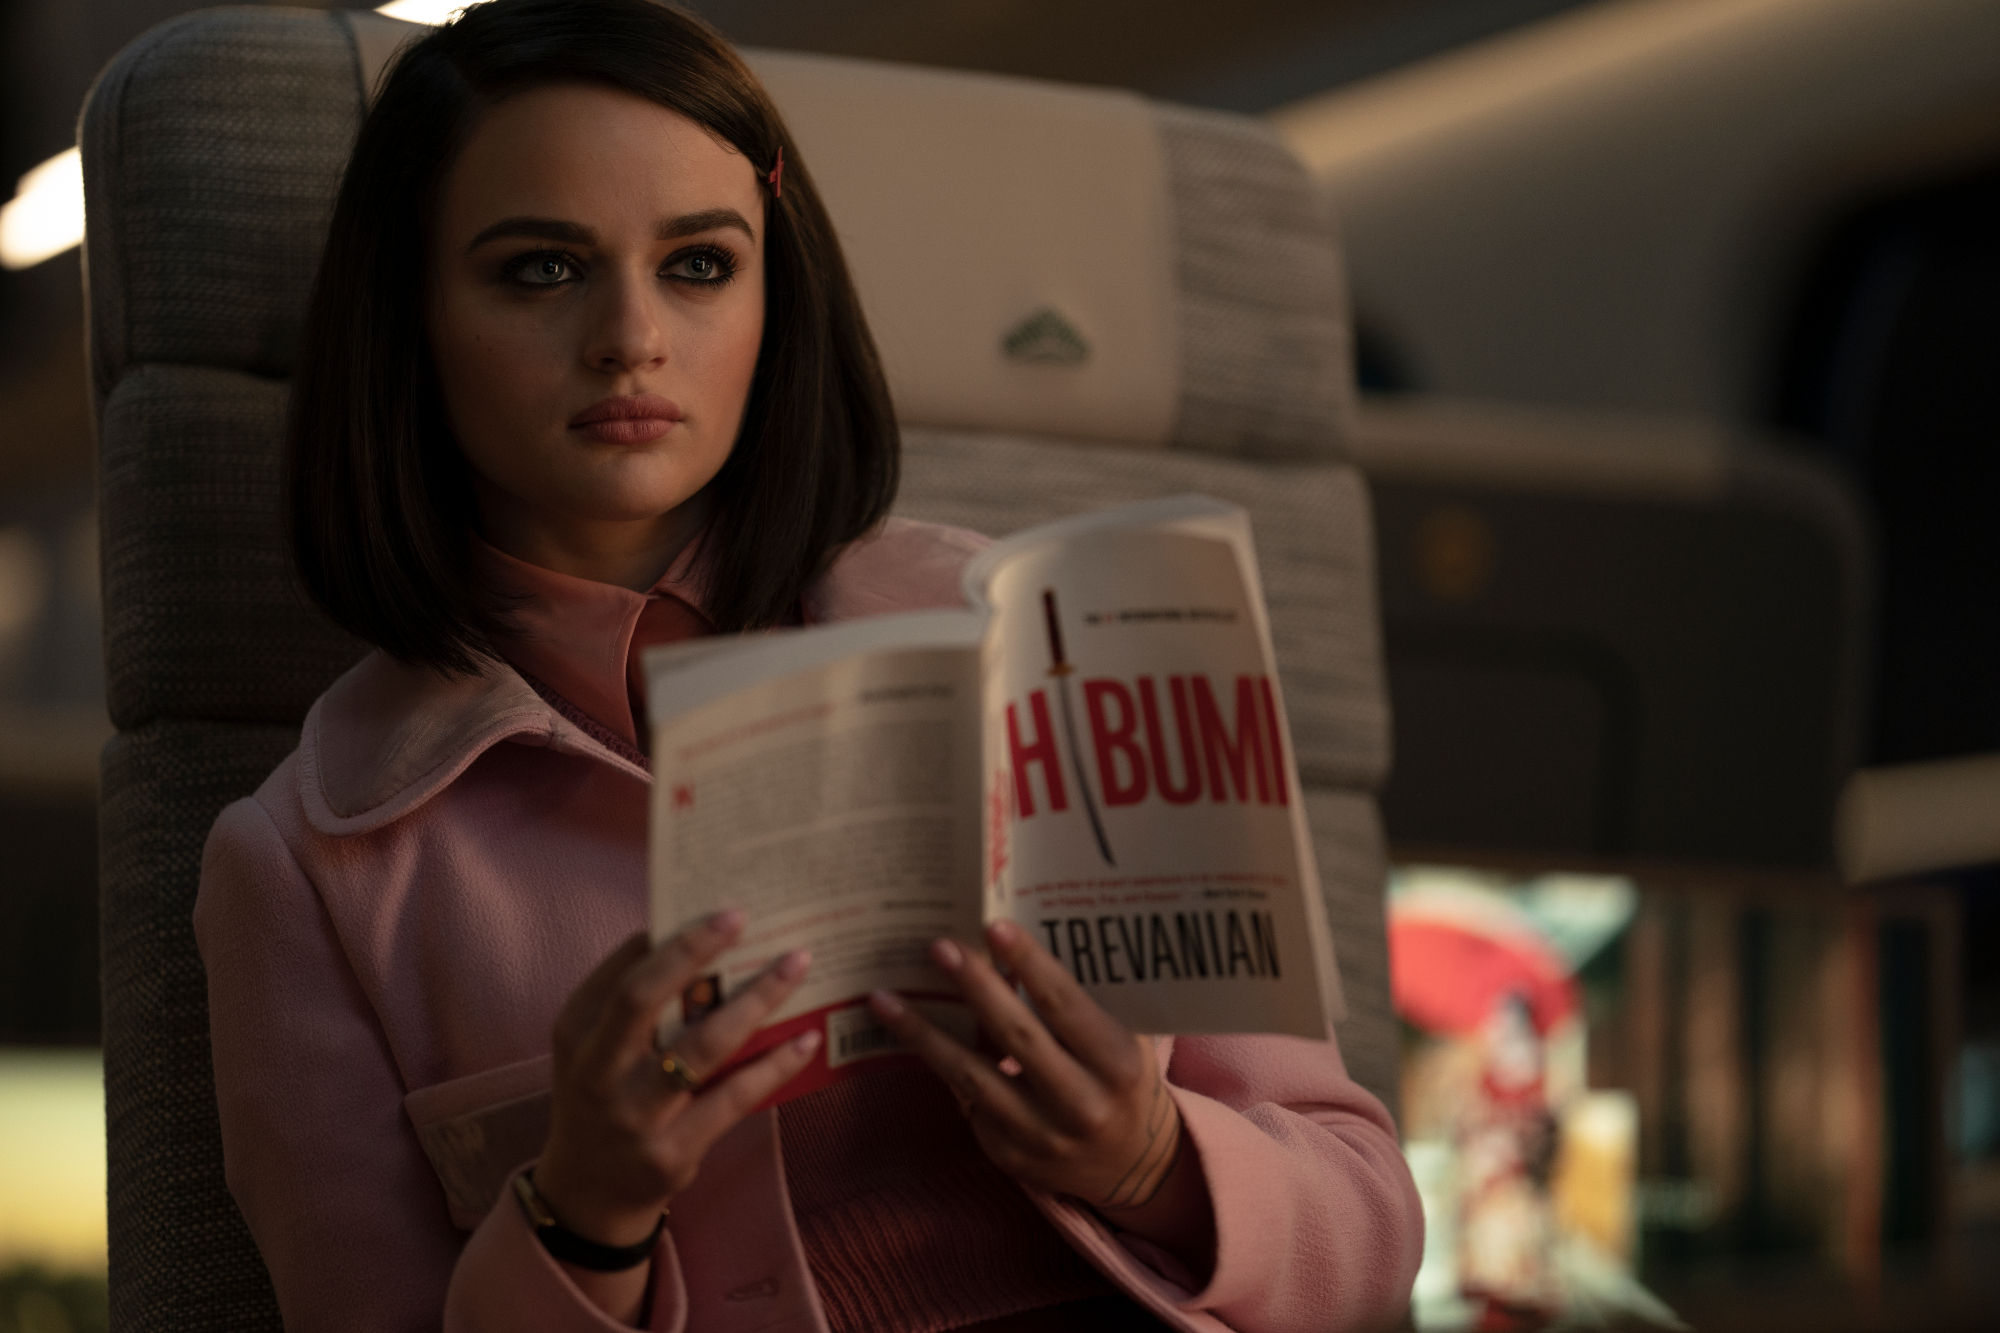 'Bullet Train' Joey King as The Prince reading a book, while wearing pink in a train seat